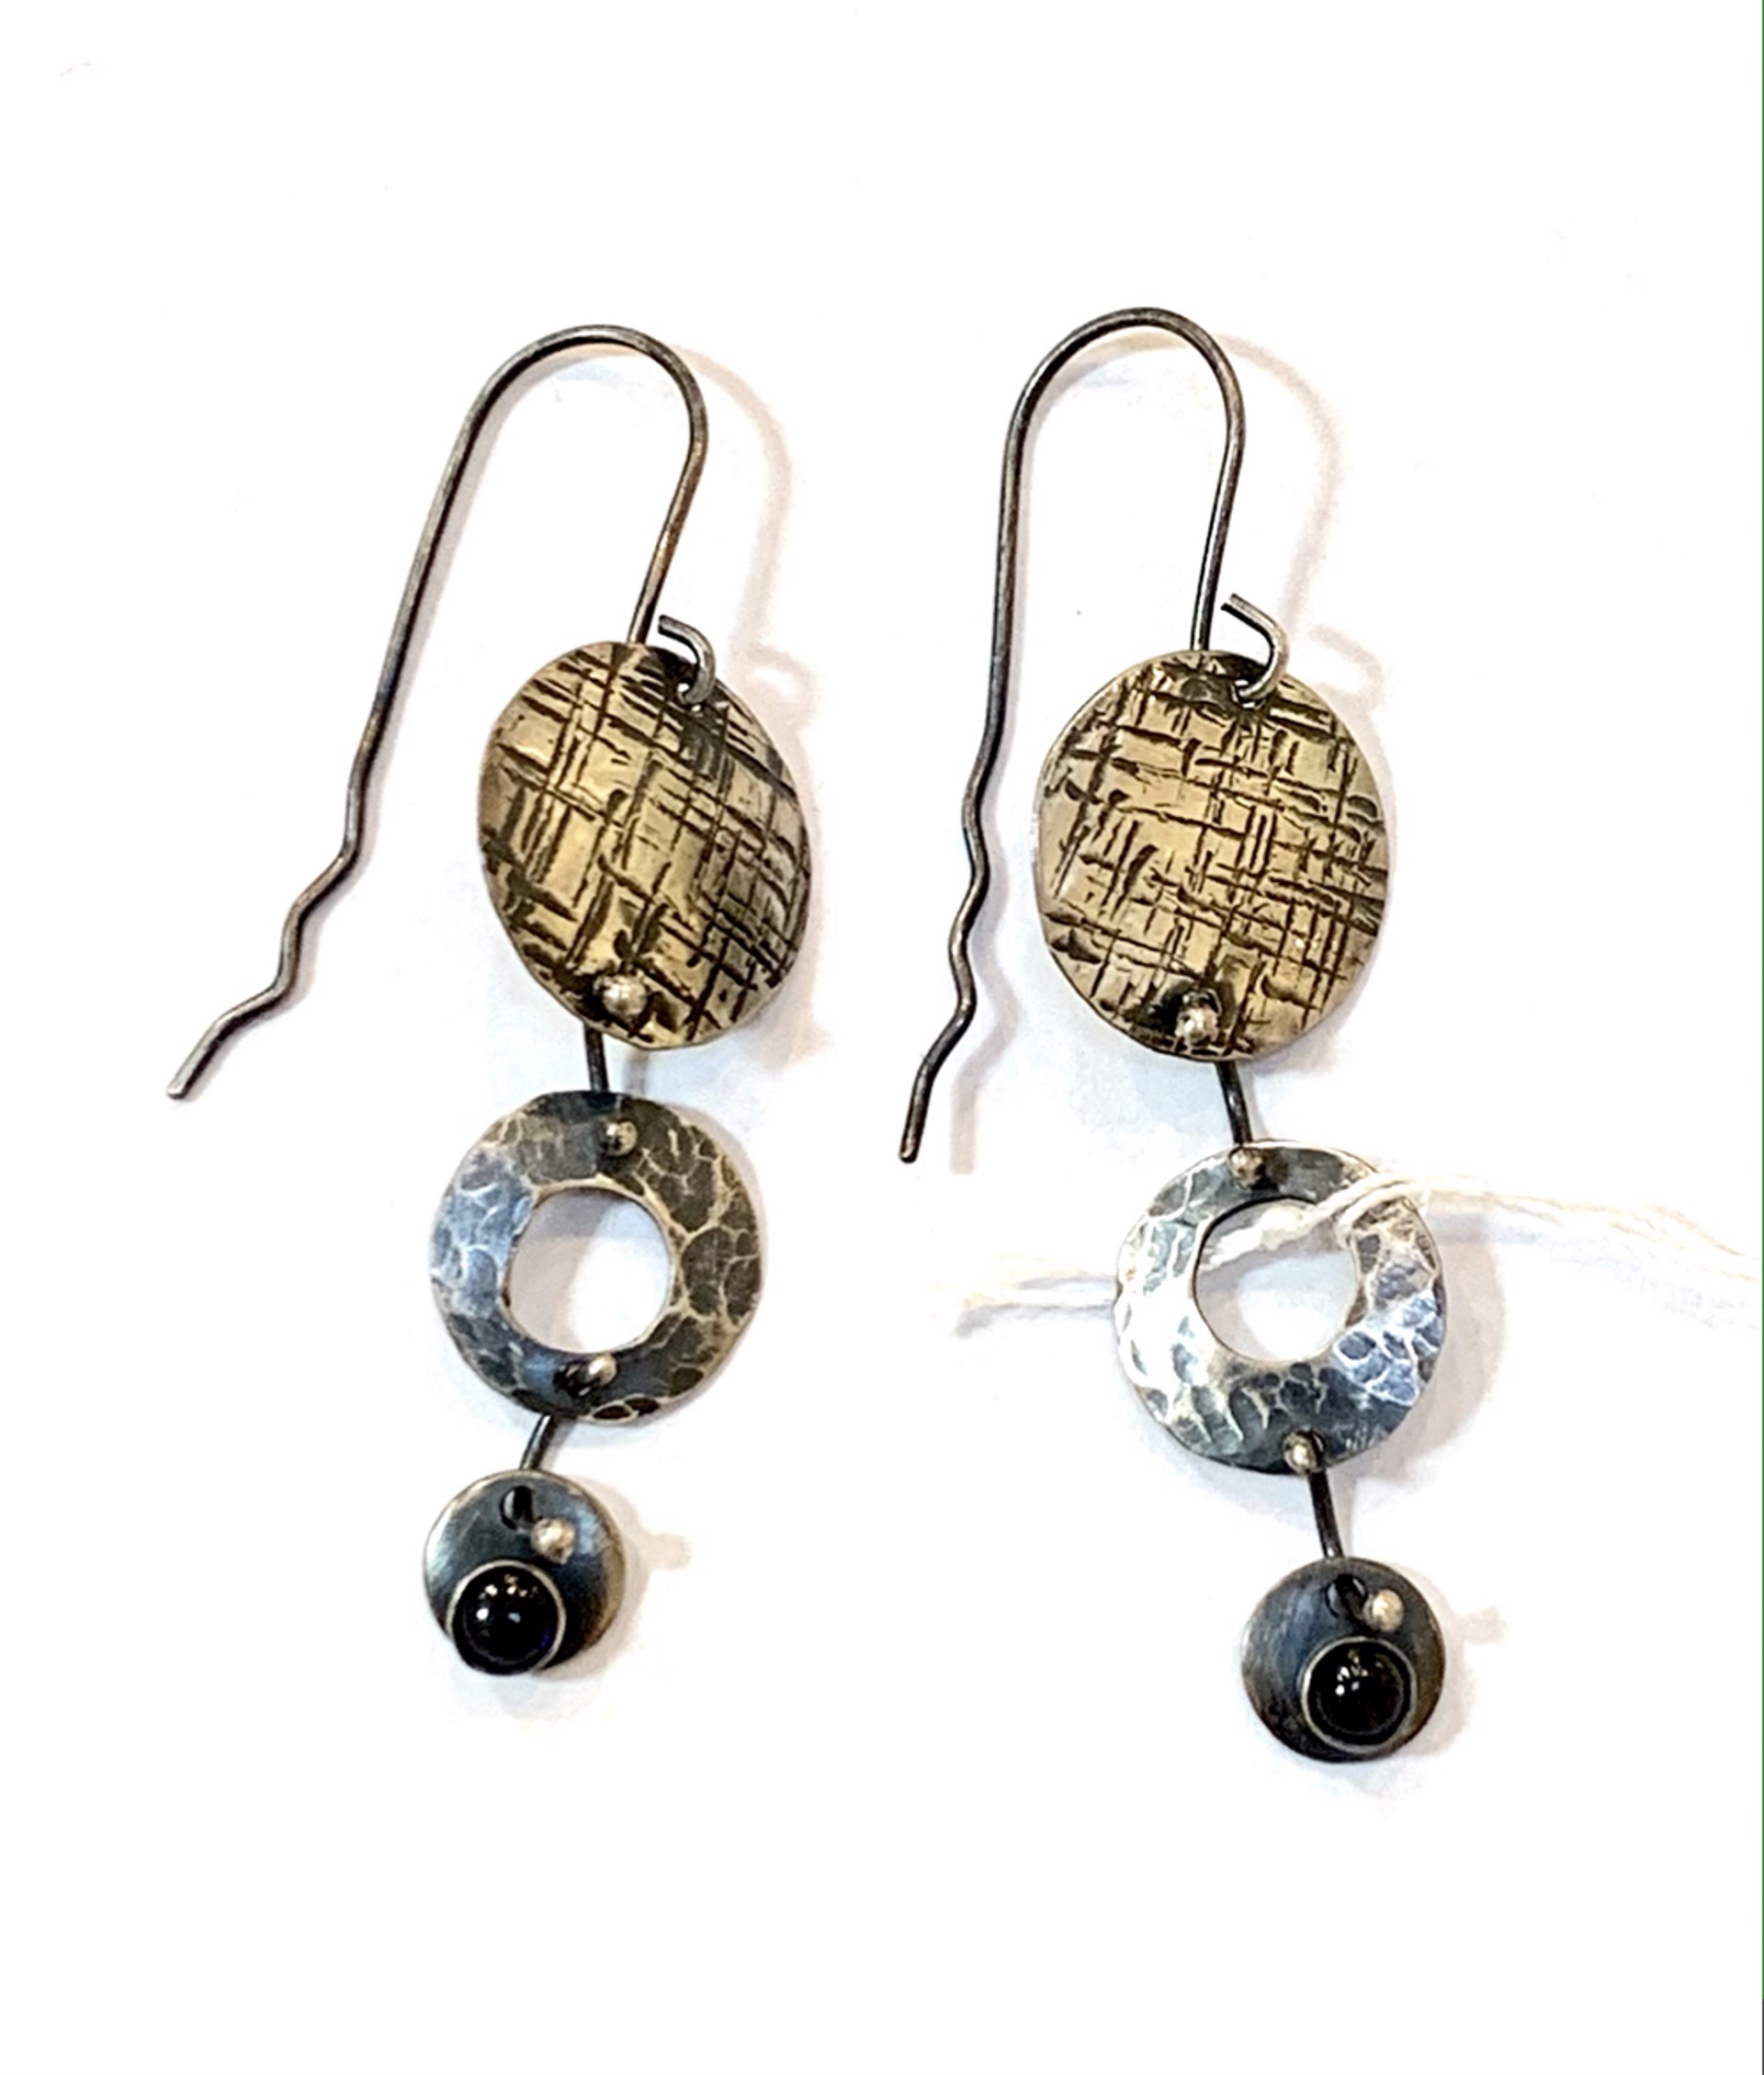 Earrings - Sterling Silver and Onyx (AC217) by Annette Campbell